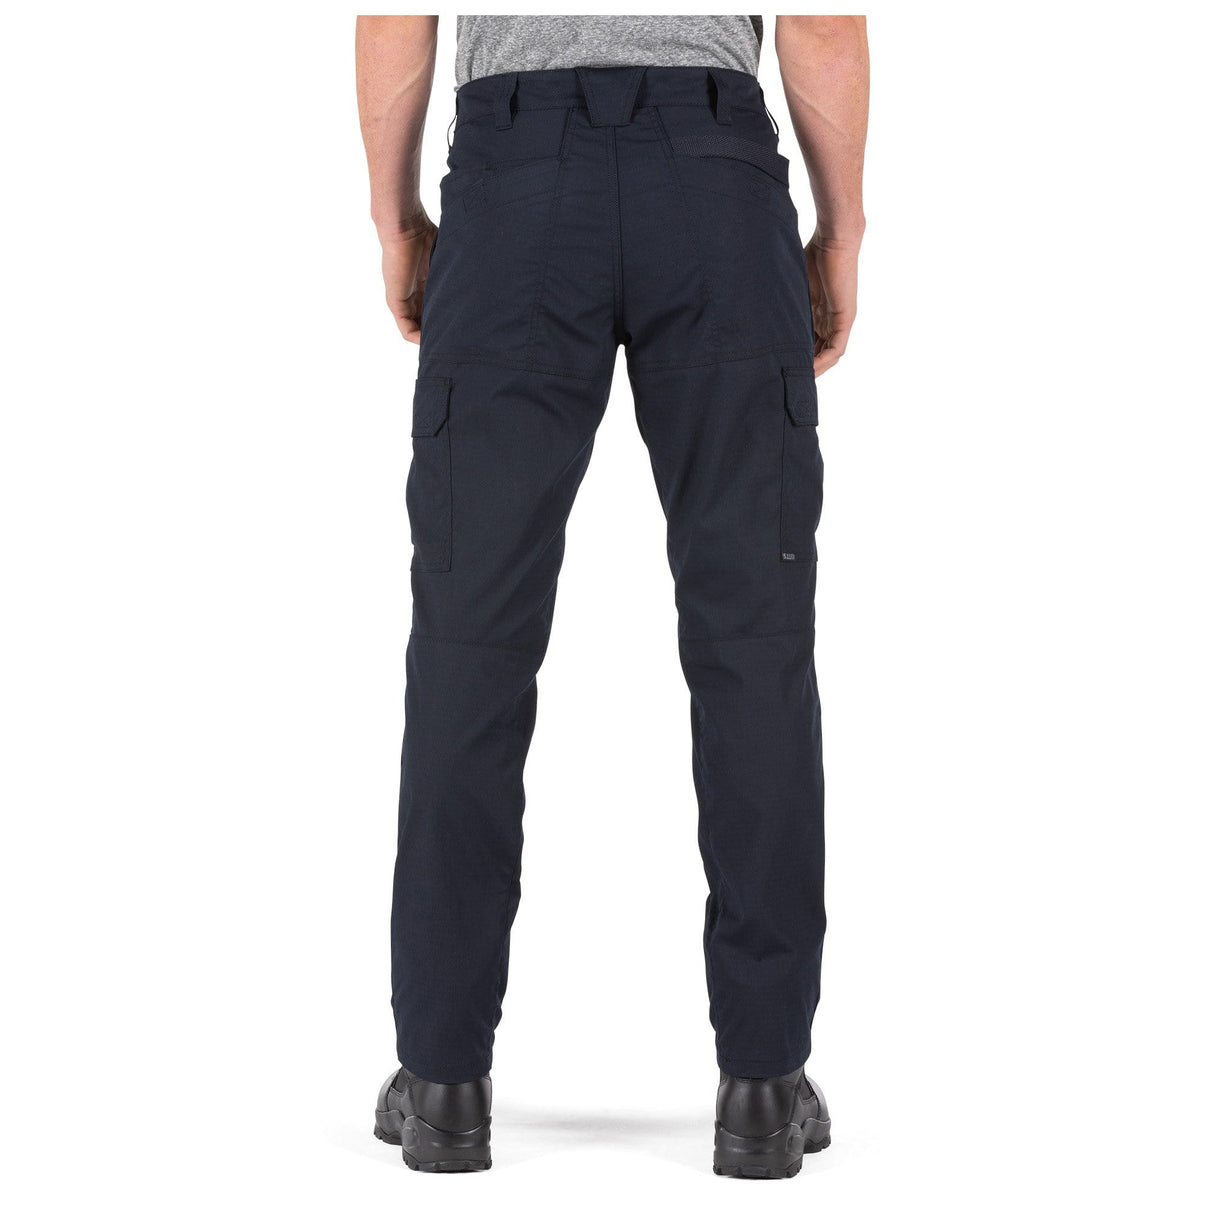 ABR PRO PANT DARK NAVY - 5.11 Tactical Finland Store